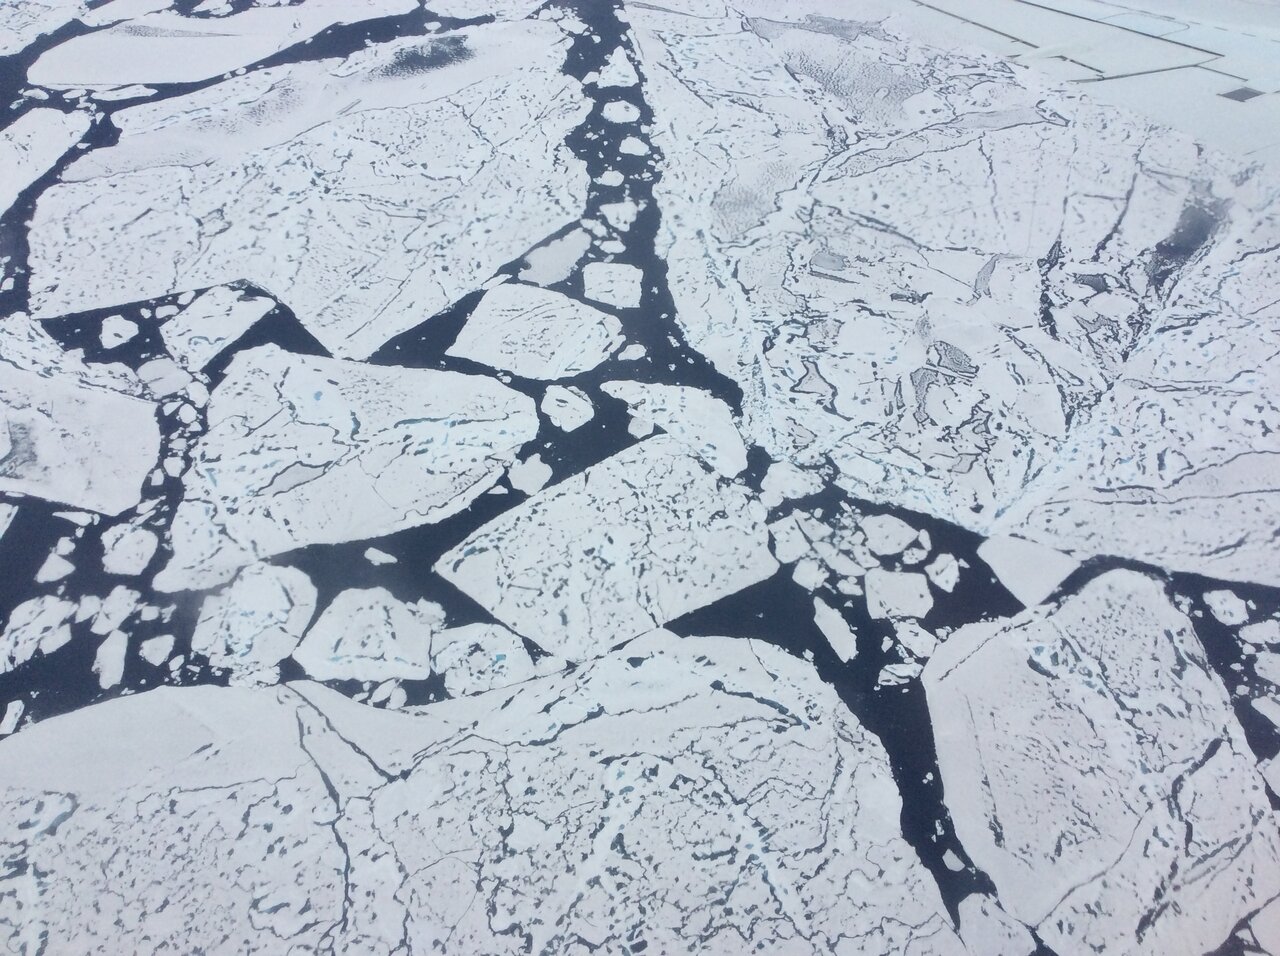 Close-up view of sea ice floes at 79 N from 500 feet from NASA's DC-8 Research aircraft. The dark features on the ice are melt ponds, and the dark areas of between the floes are open water of the Arctic Ocean.